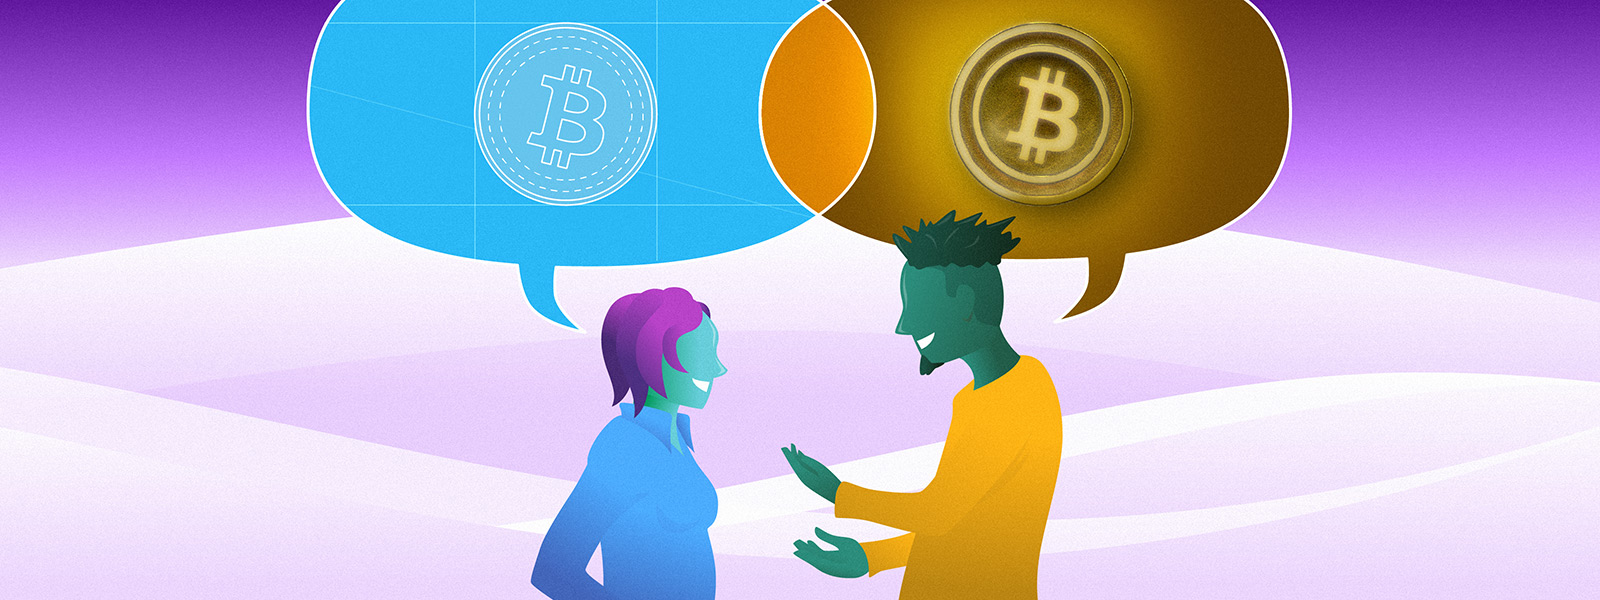 Illustration of two people having a conversation, each of them having a speech bubble with a different stylized version of the bitcoin ₿